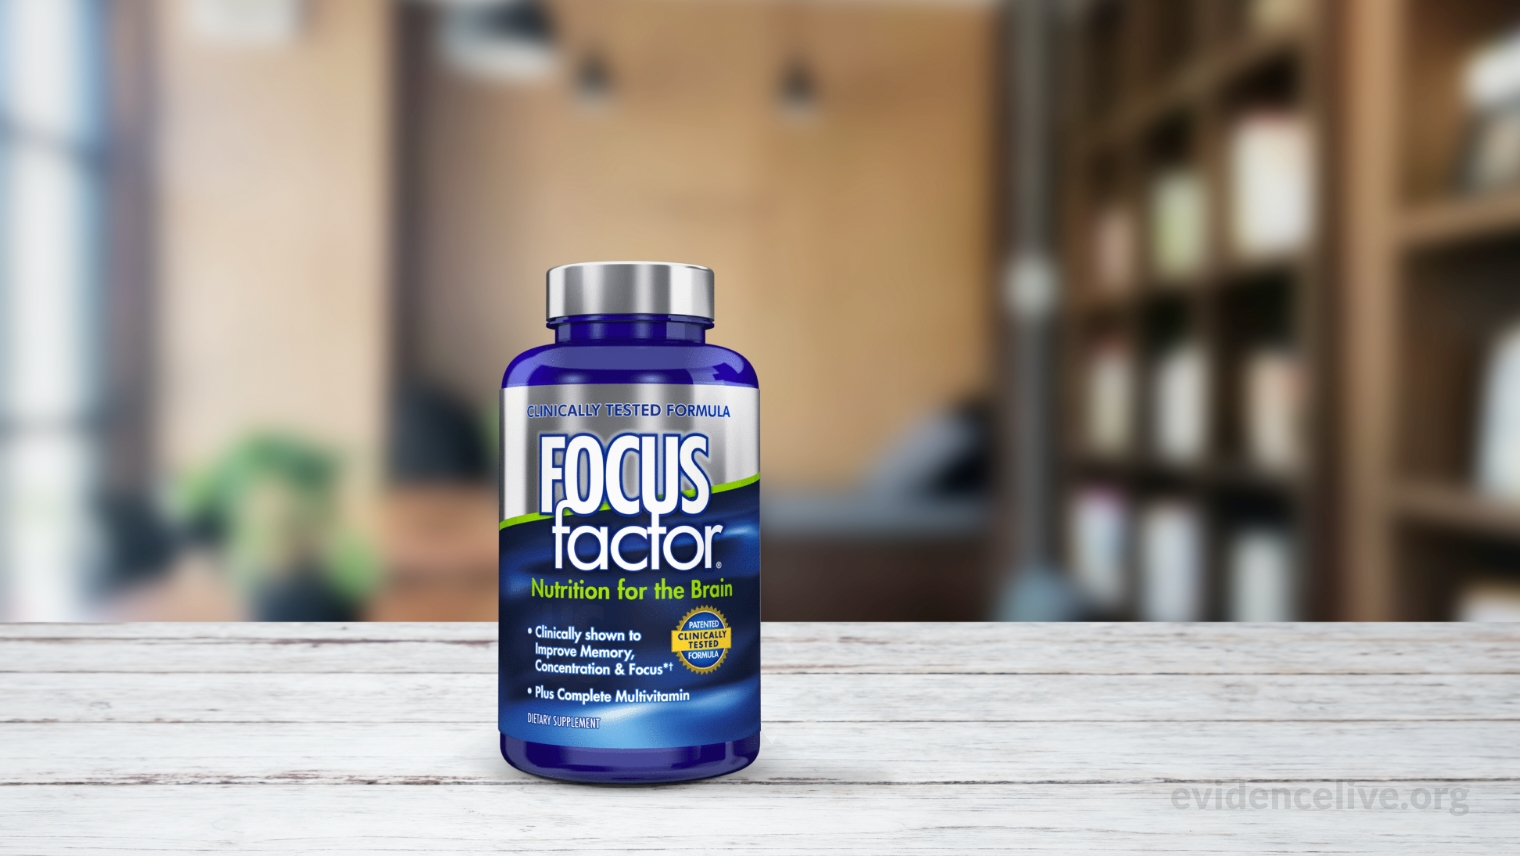 Focus Factor benefits and effects